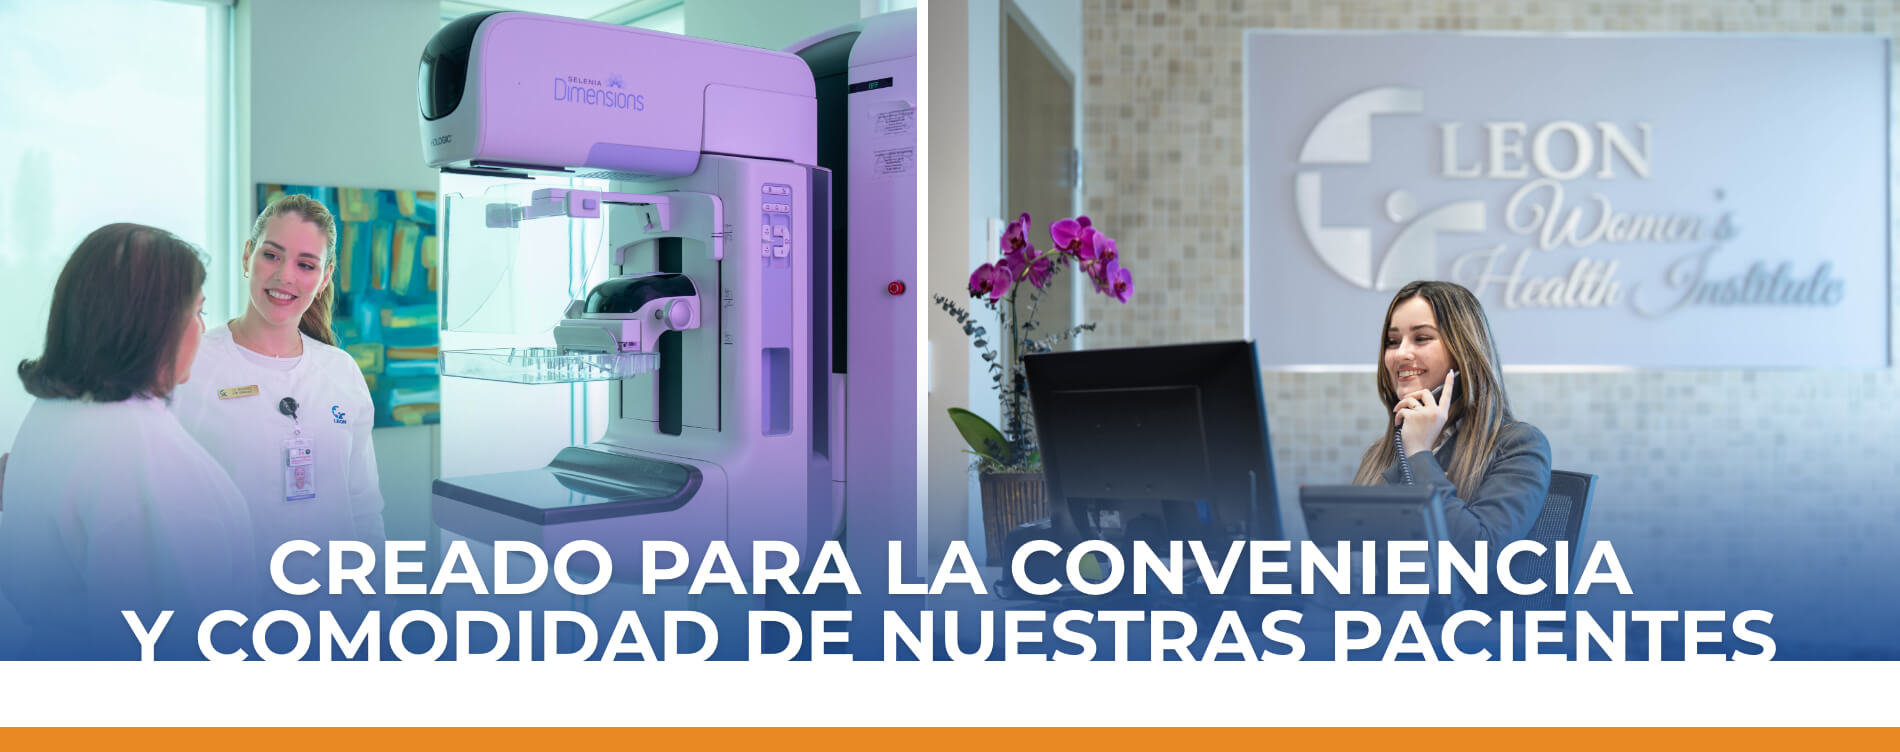 The left side of the image shows two women in front of a mammogram machine.  On the right side, a woman is shown in front of a computer answering a phone call.